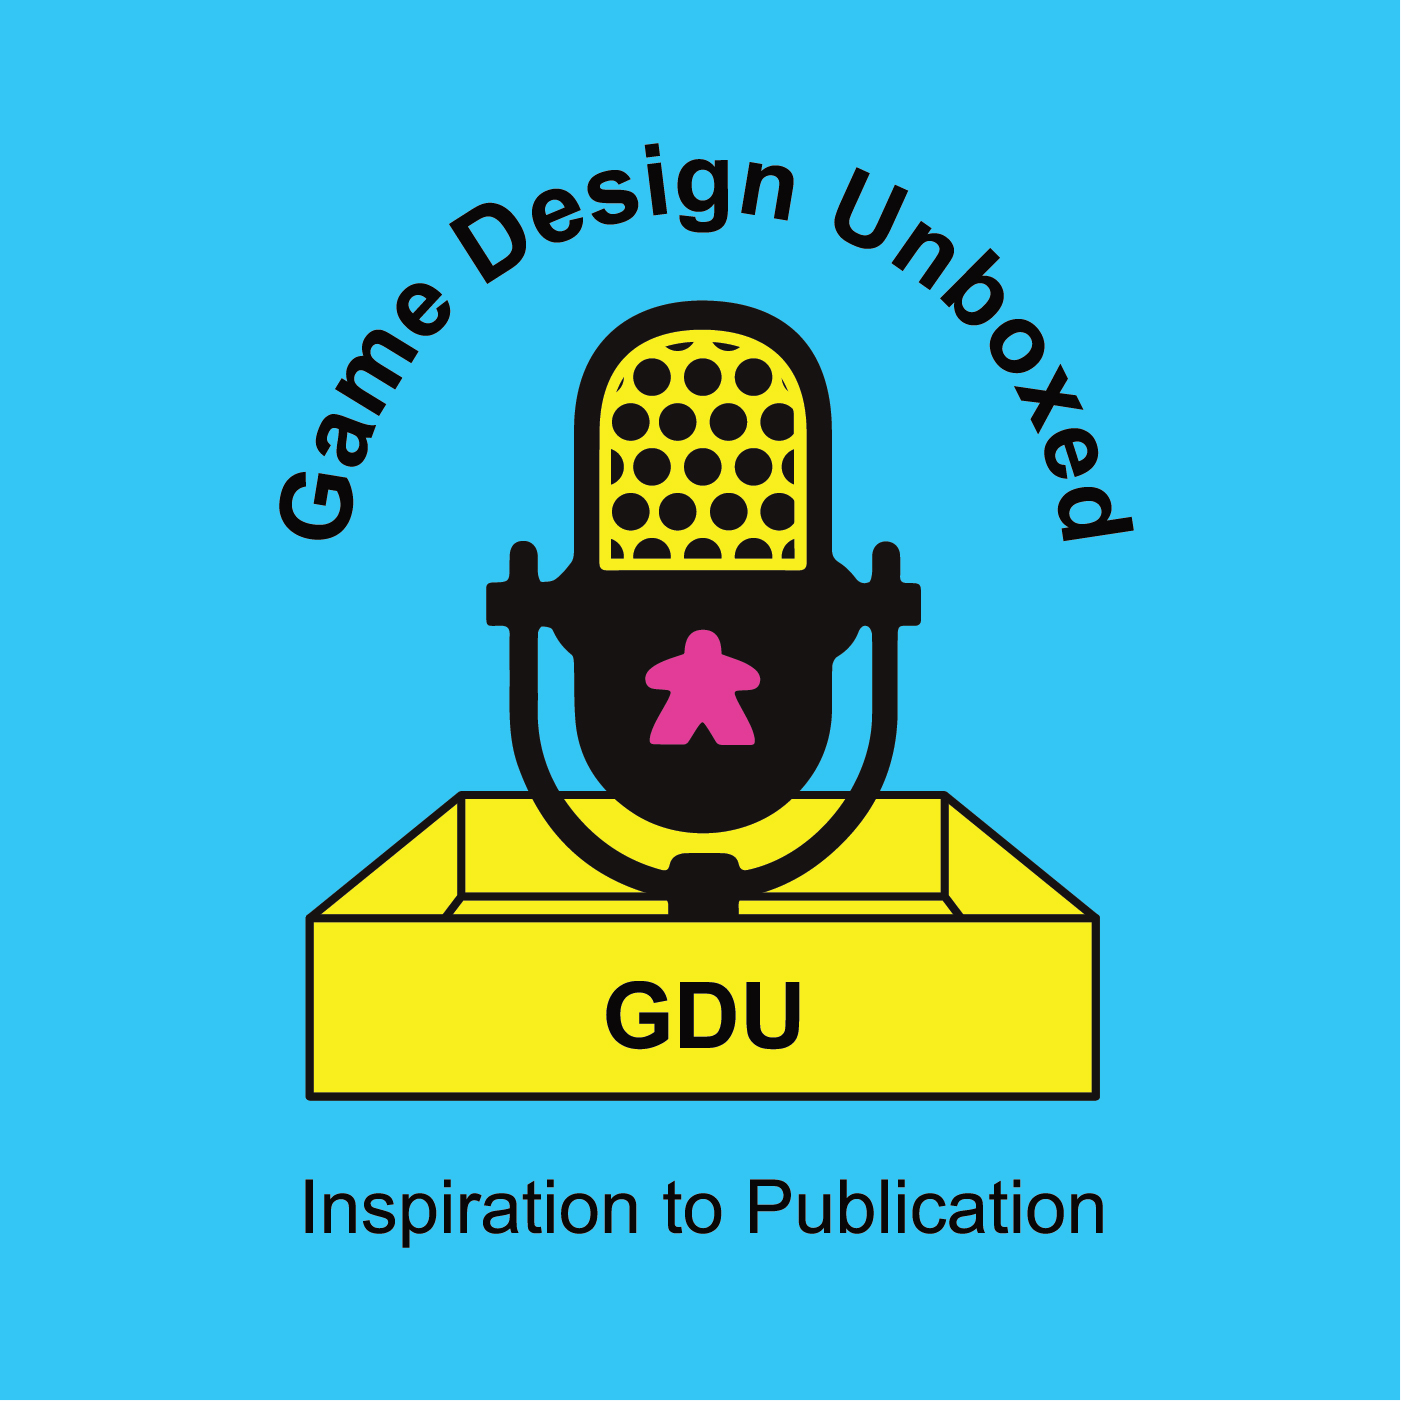 Game Design Unboxed: Inspiration to Publication